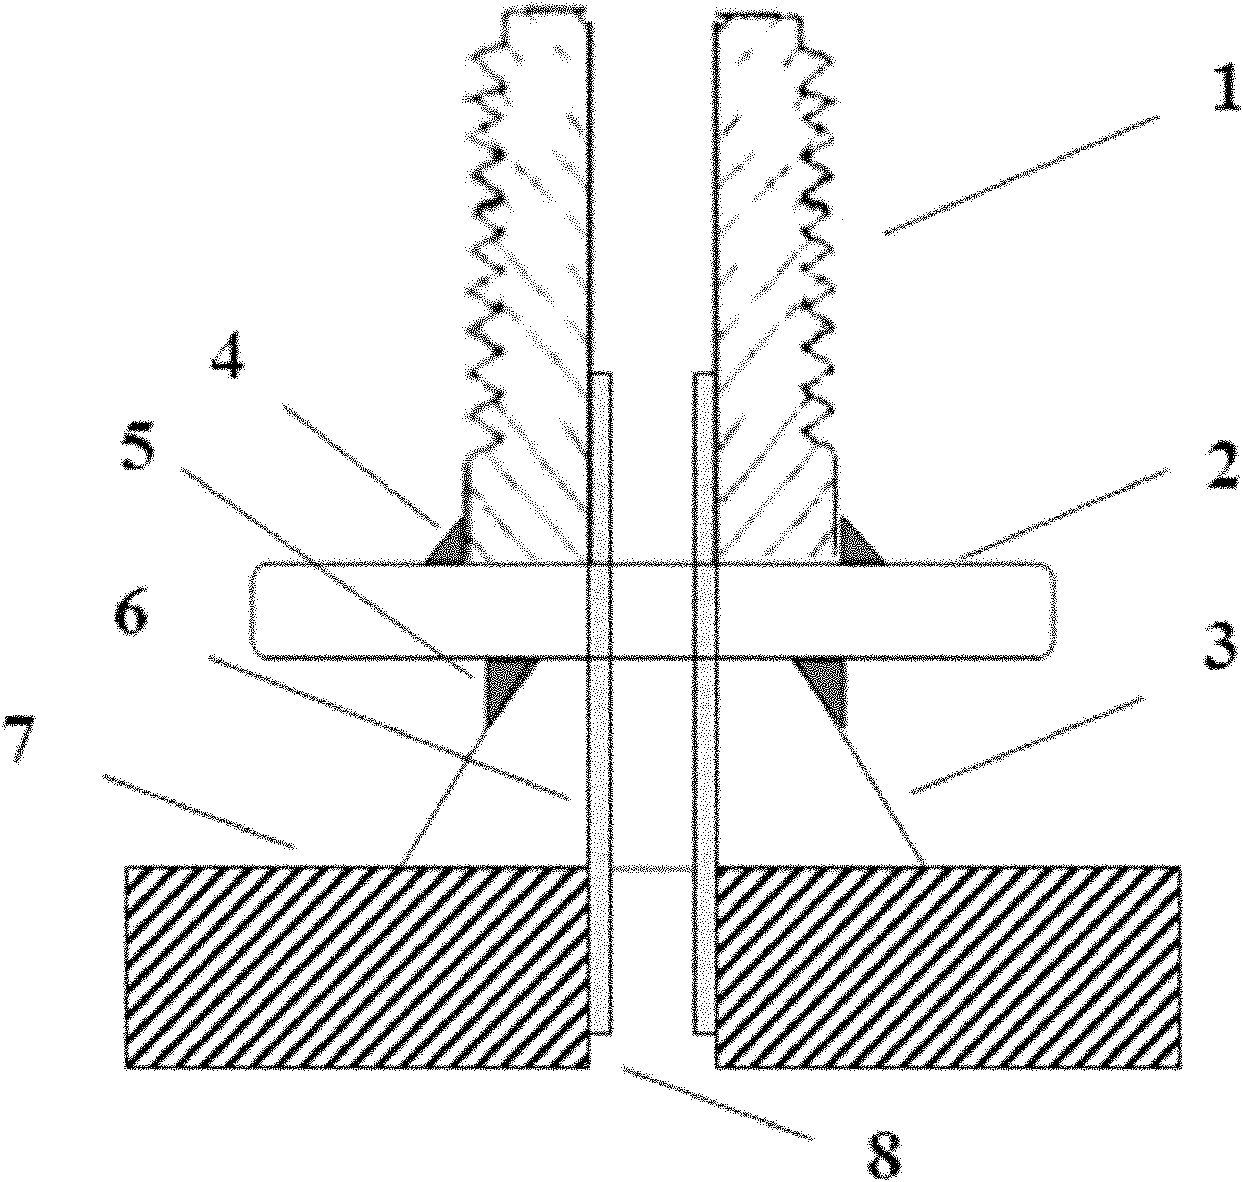 Small-sized device for connecting plane micropore for single-pore vacuum encapsulation and pipeline